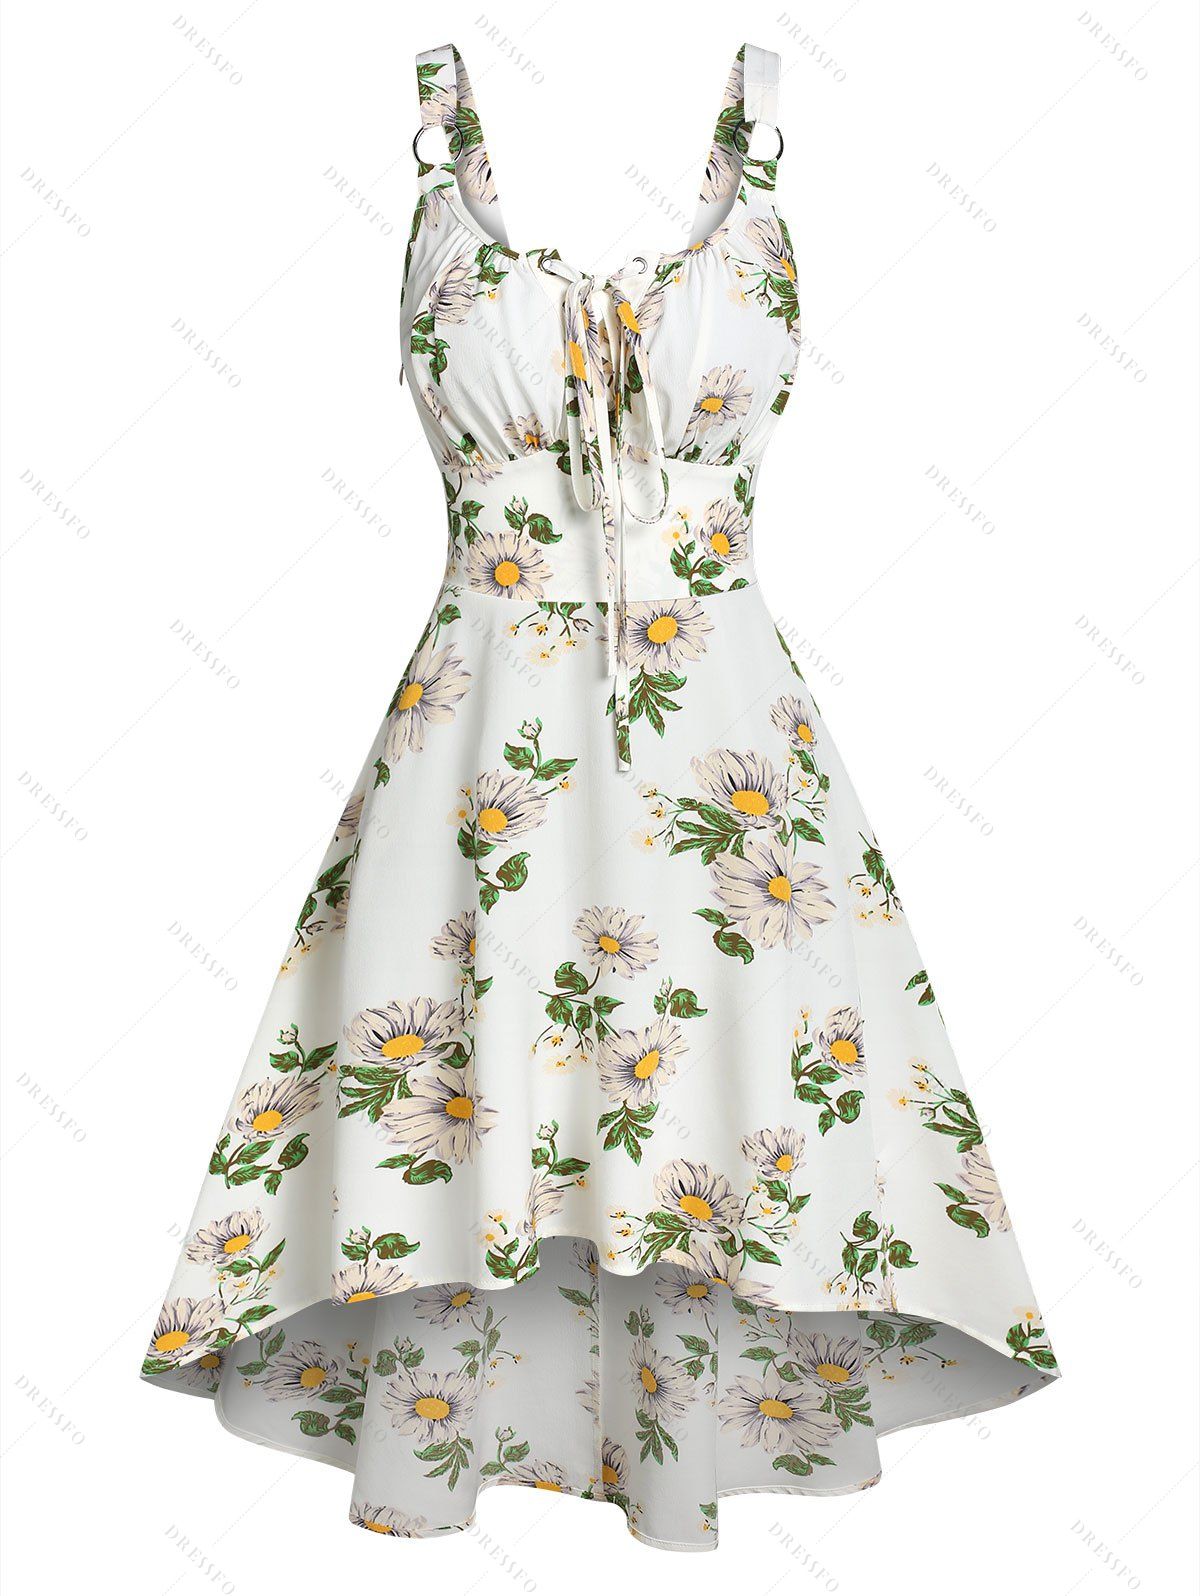 Flower Print Vacation Sundress Garden Party Dress Lace Up O Ring High Low Dress - WHITE M